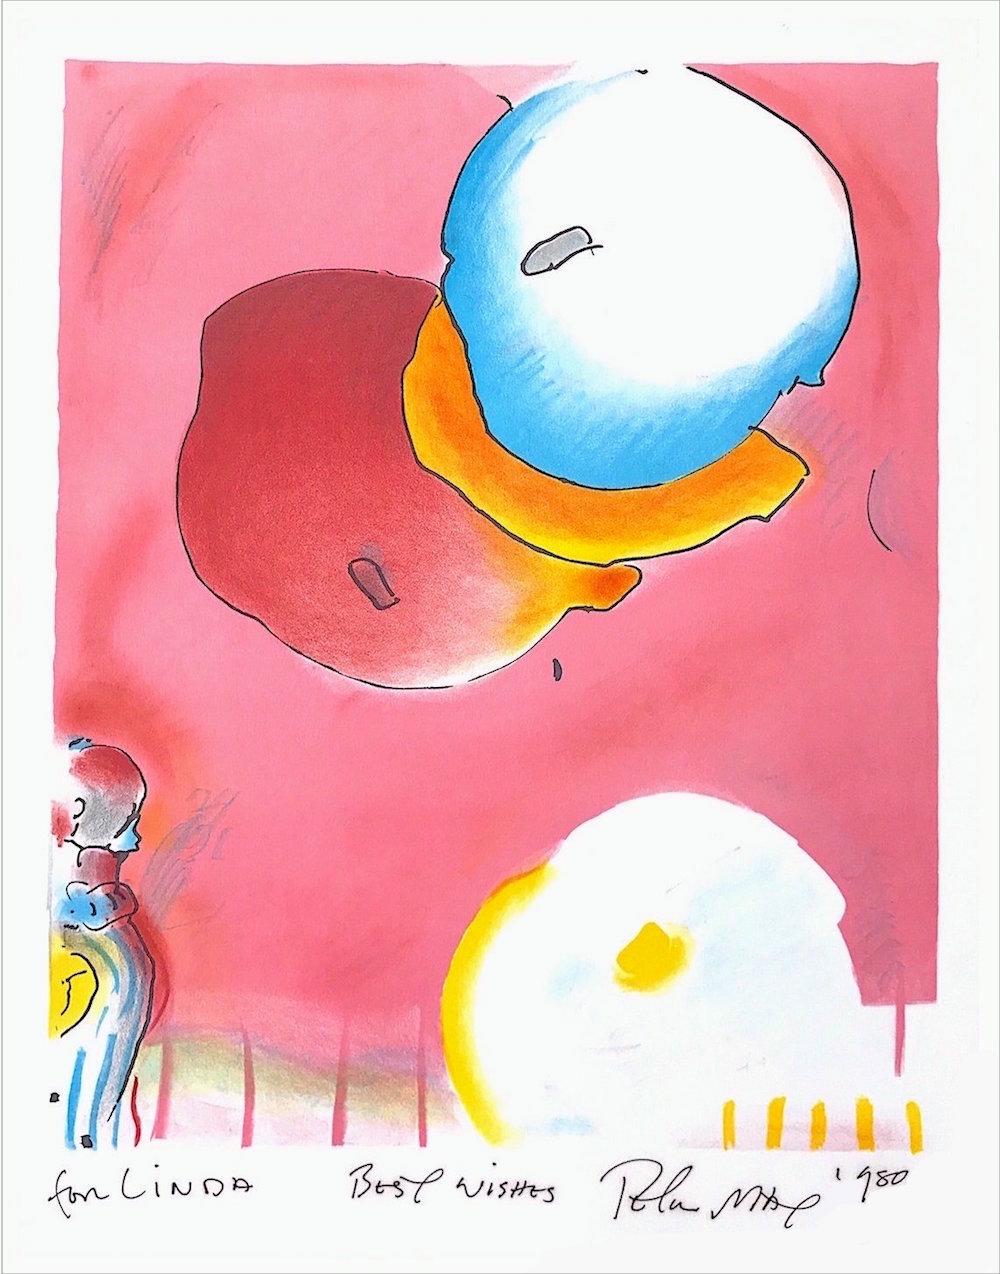 Peter Max Interior Print – TWO FLOATING Signierte Lithographie, Abstrakte Luftballons, Pop Art, Rot Rosa Gelb Blau